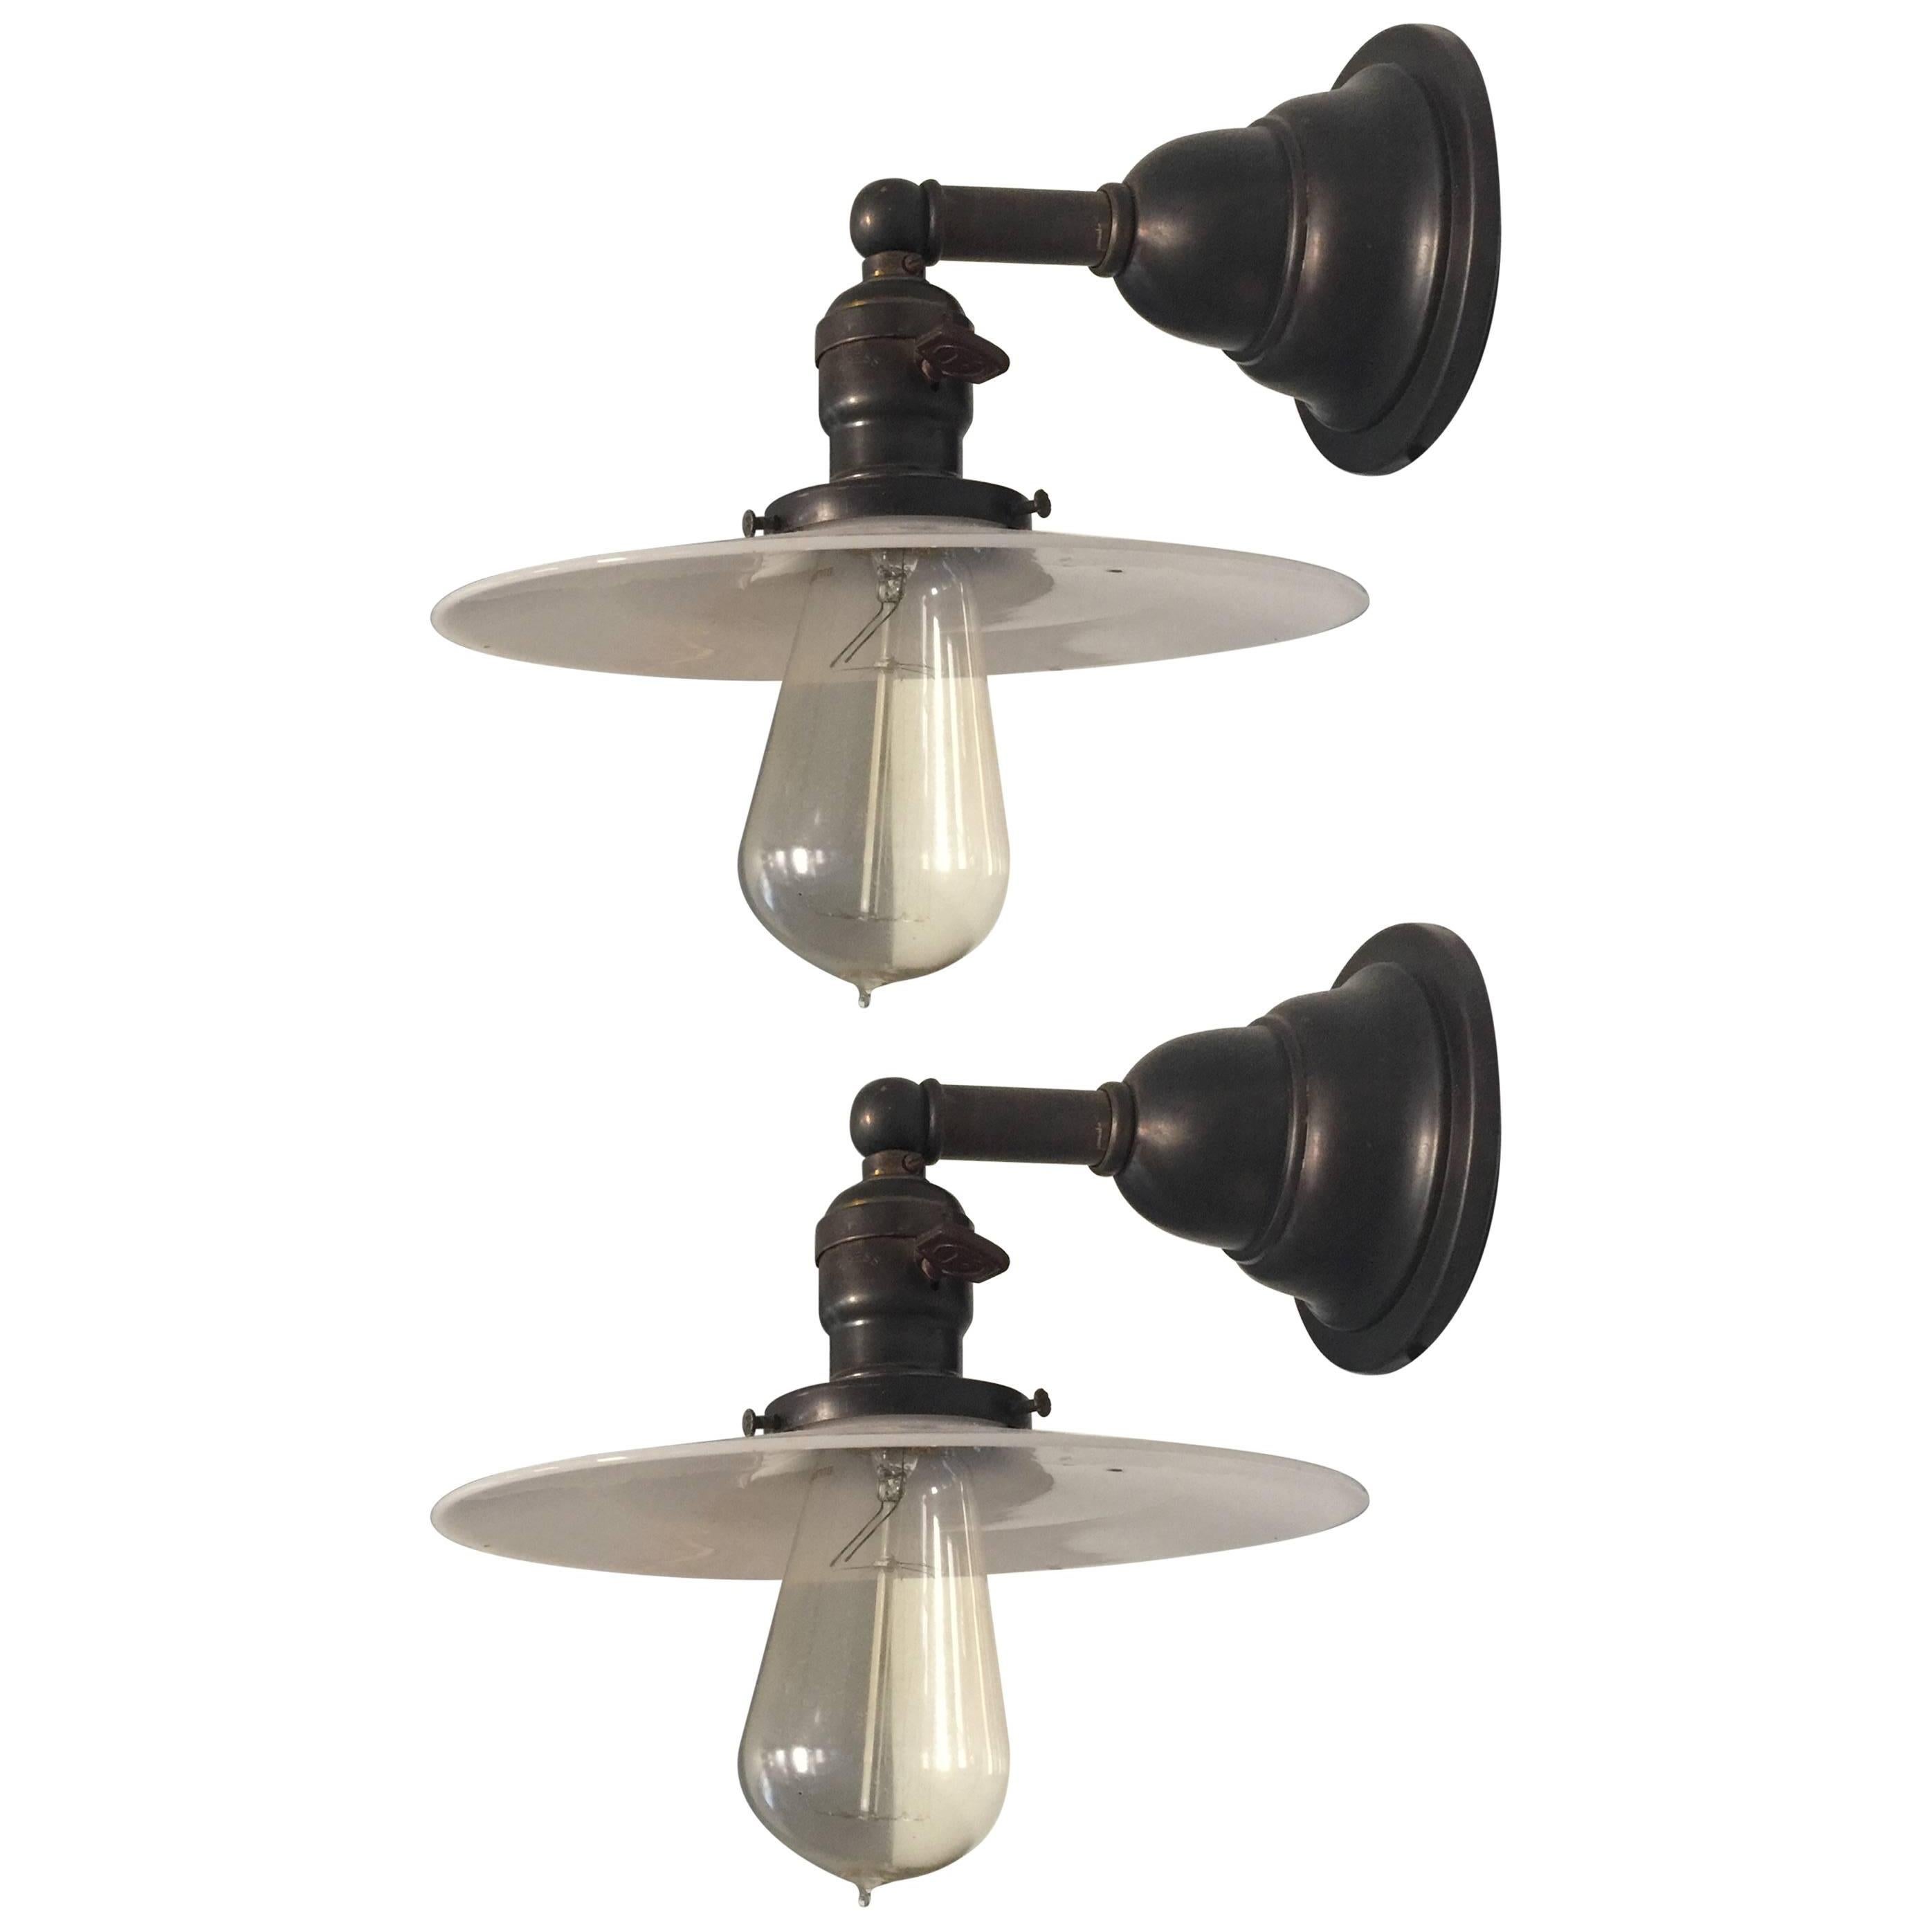 Pair of Vintage Bronzed Wall Lamps with Milk Glass Shades